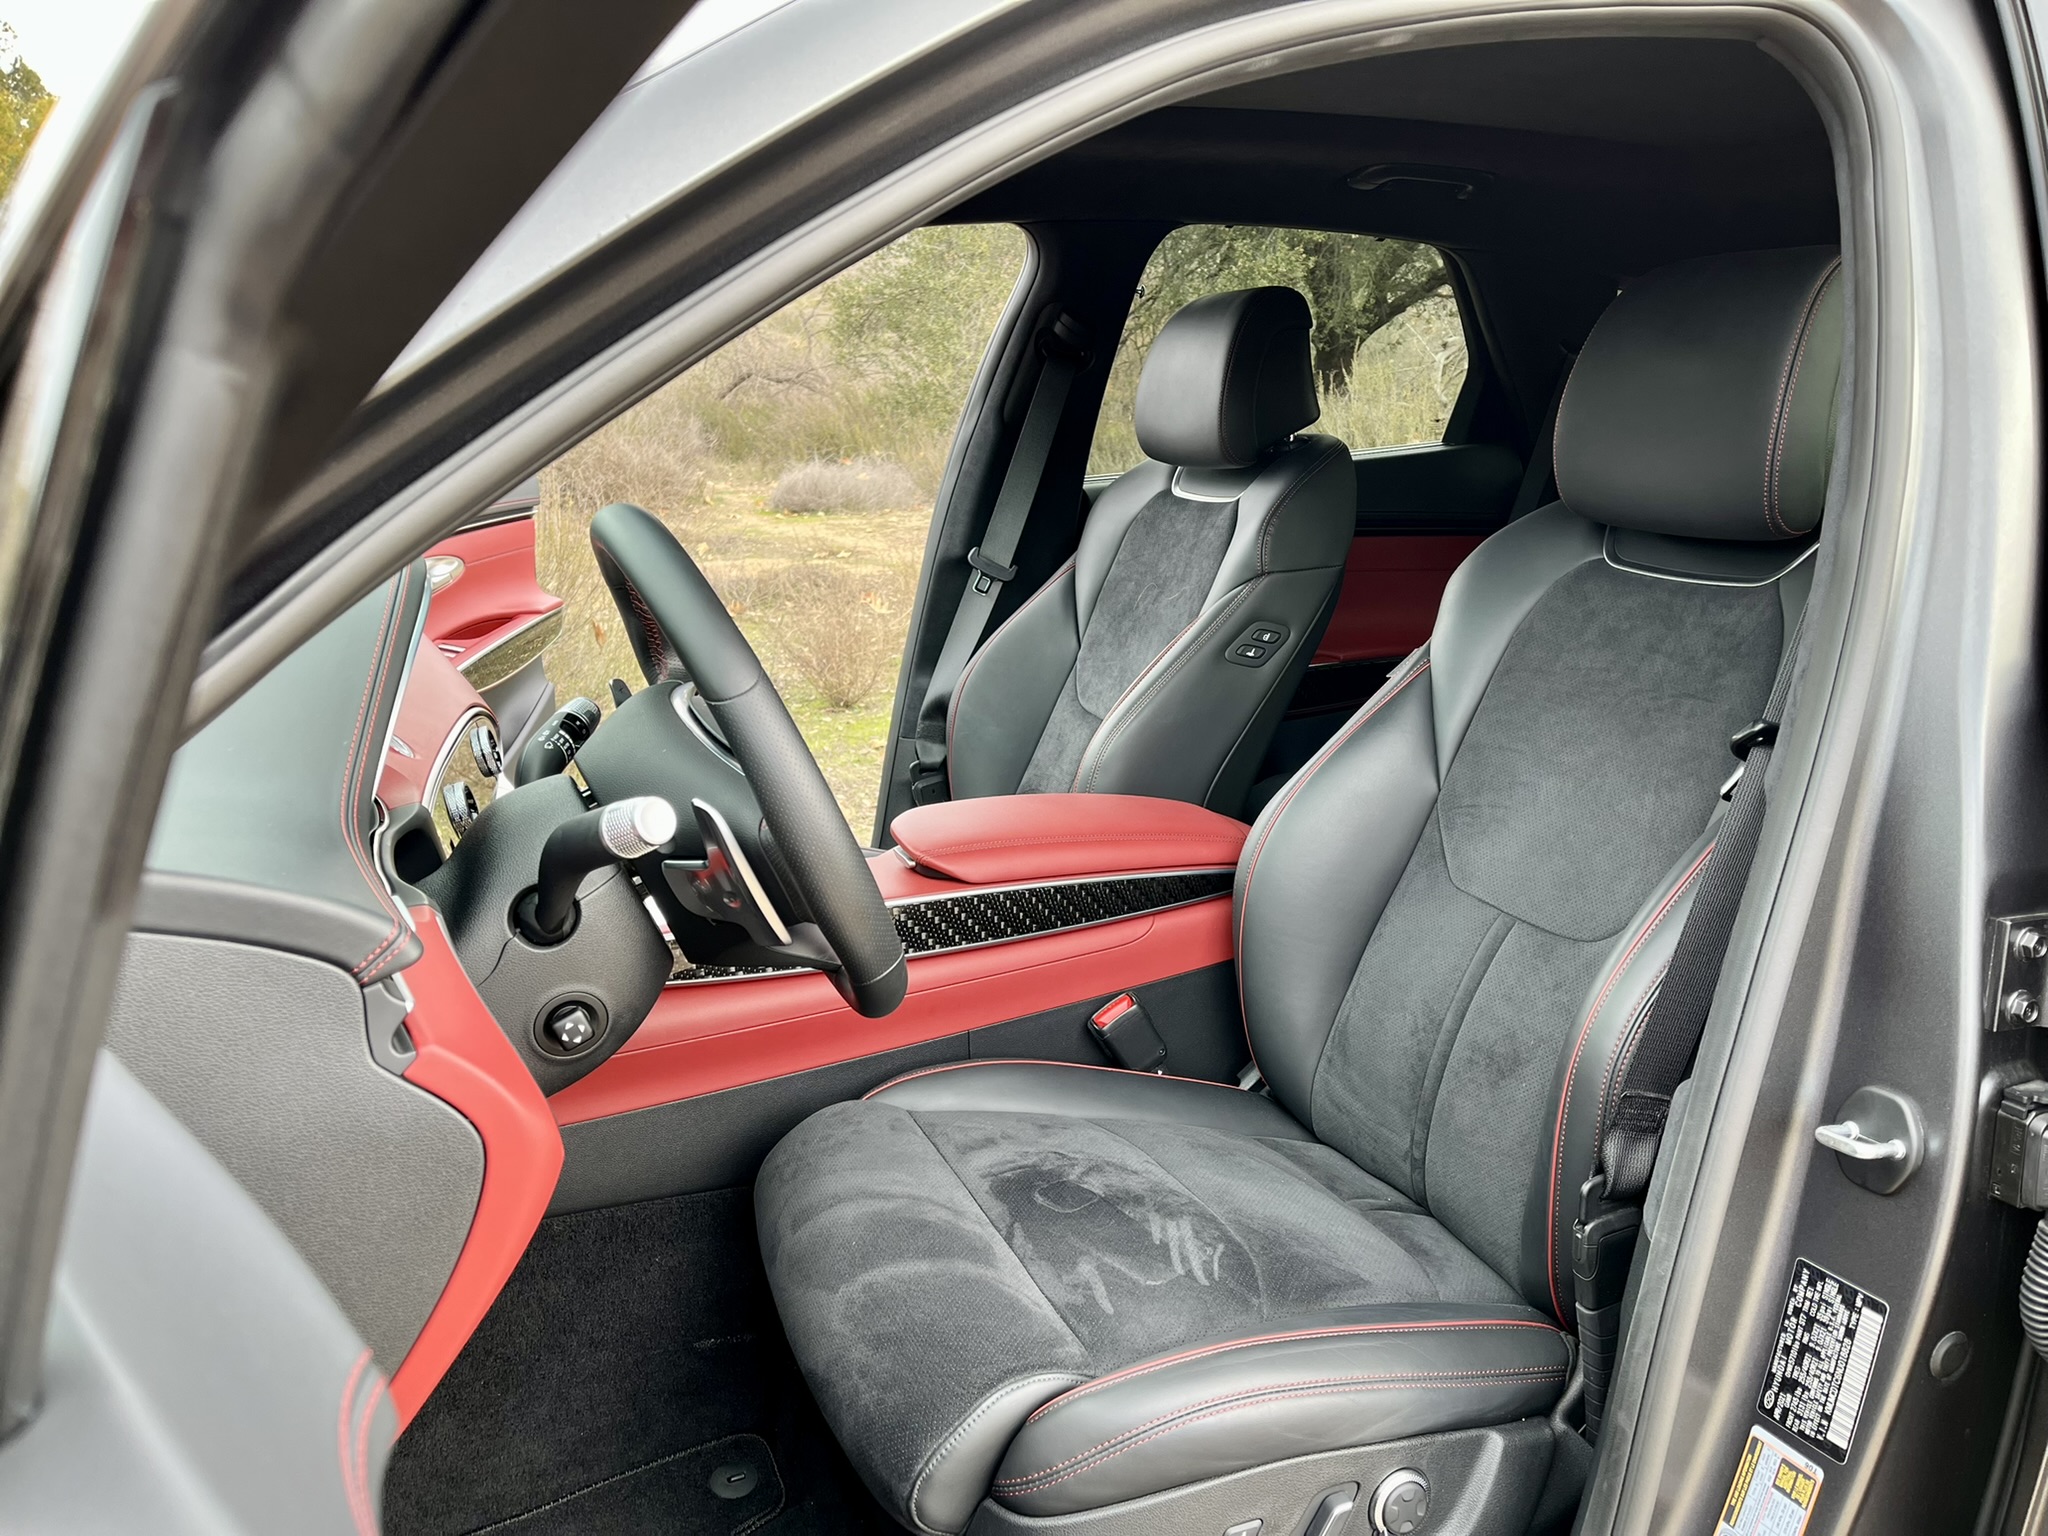 The front seats in the GV70